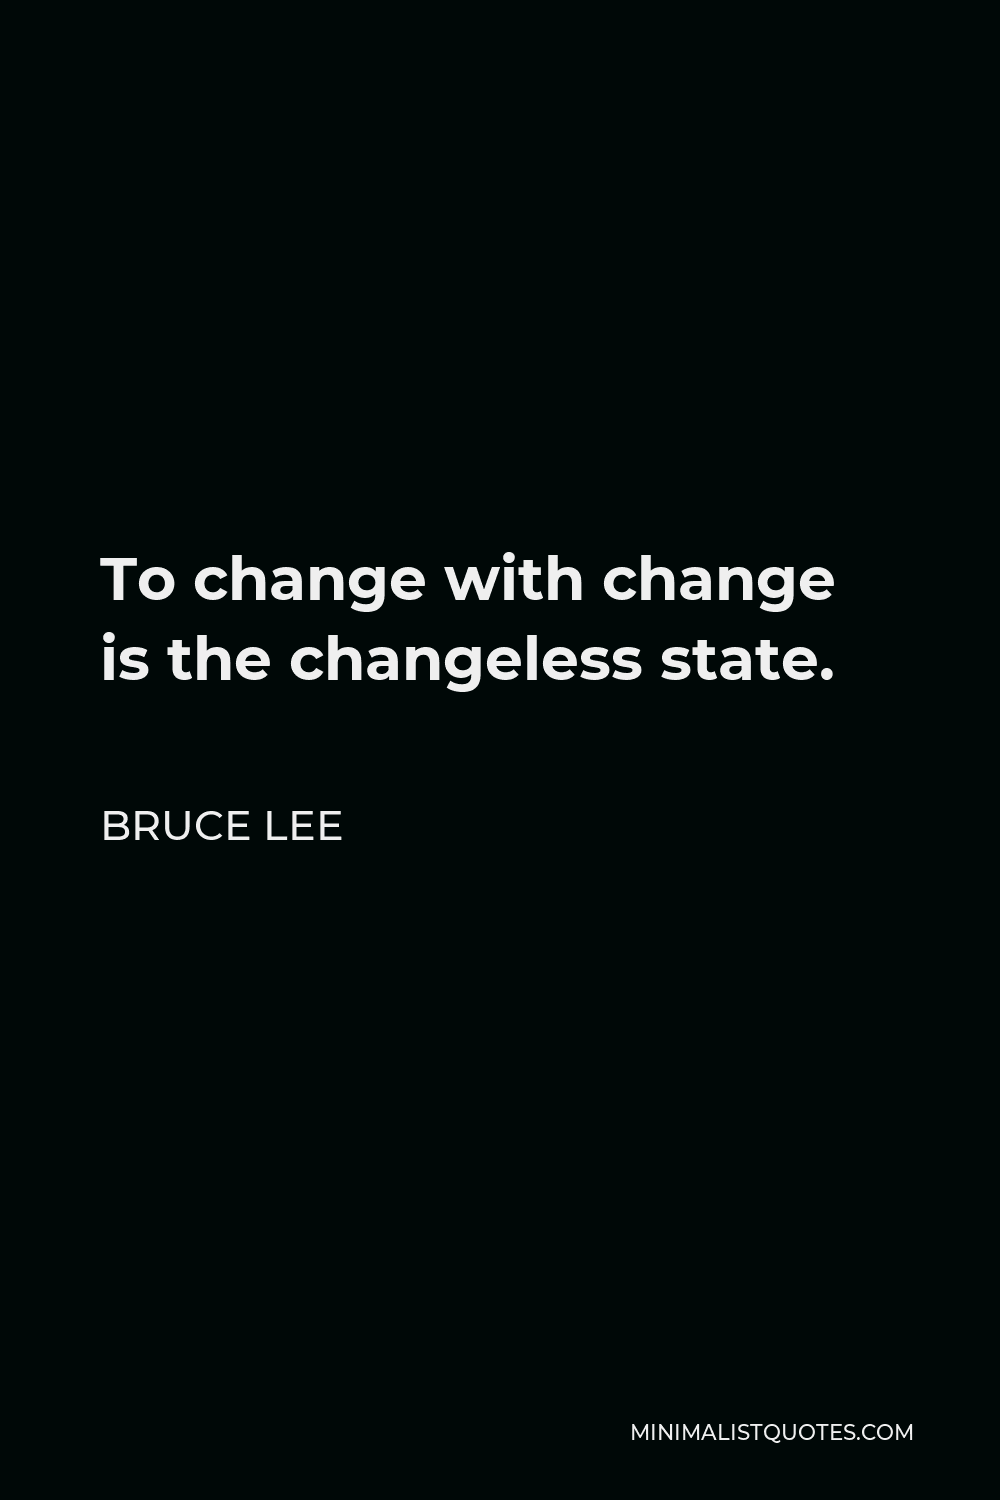 Bruce Lee Quote - To change with change is the changeless state.